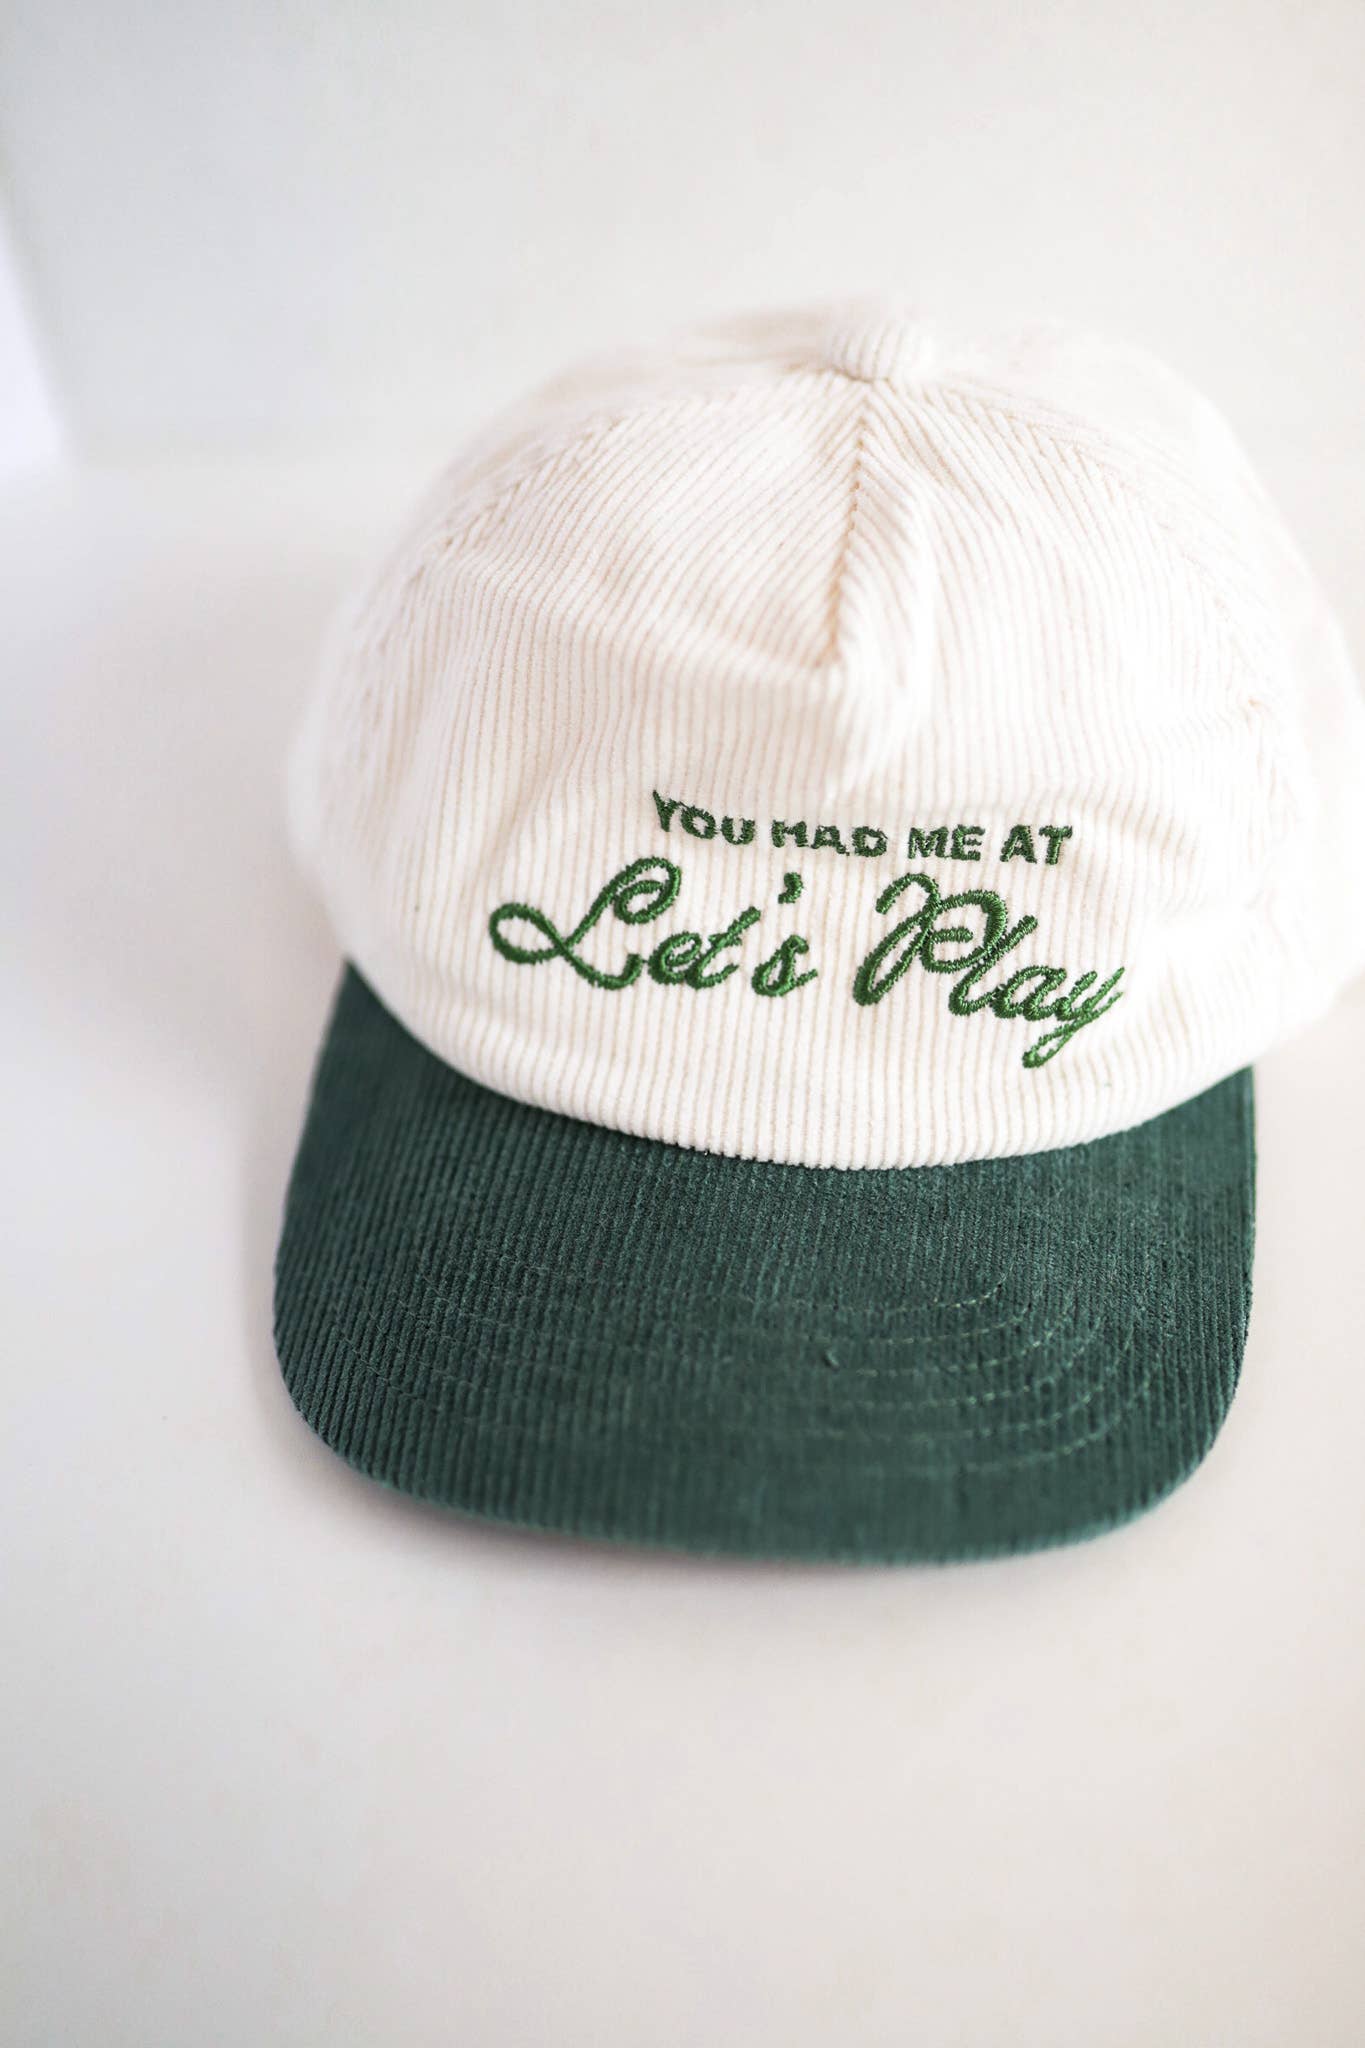 Let's Play Kids Hat